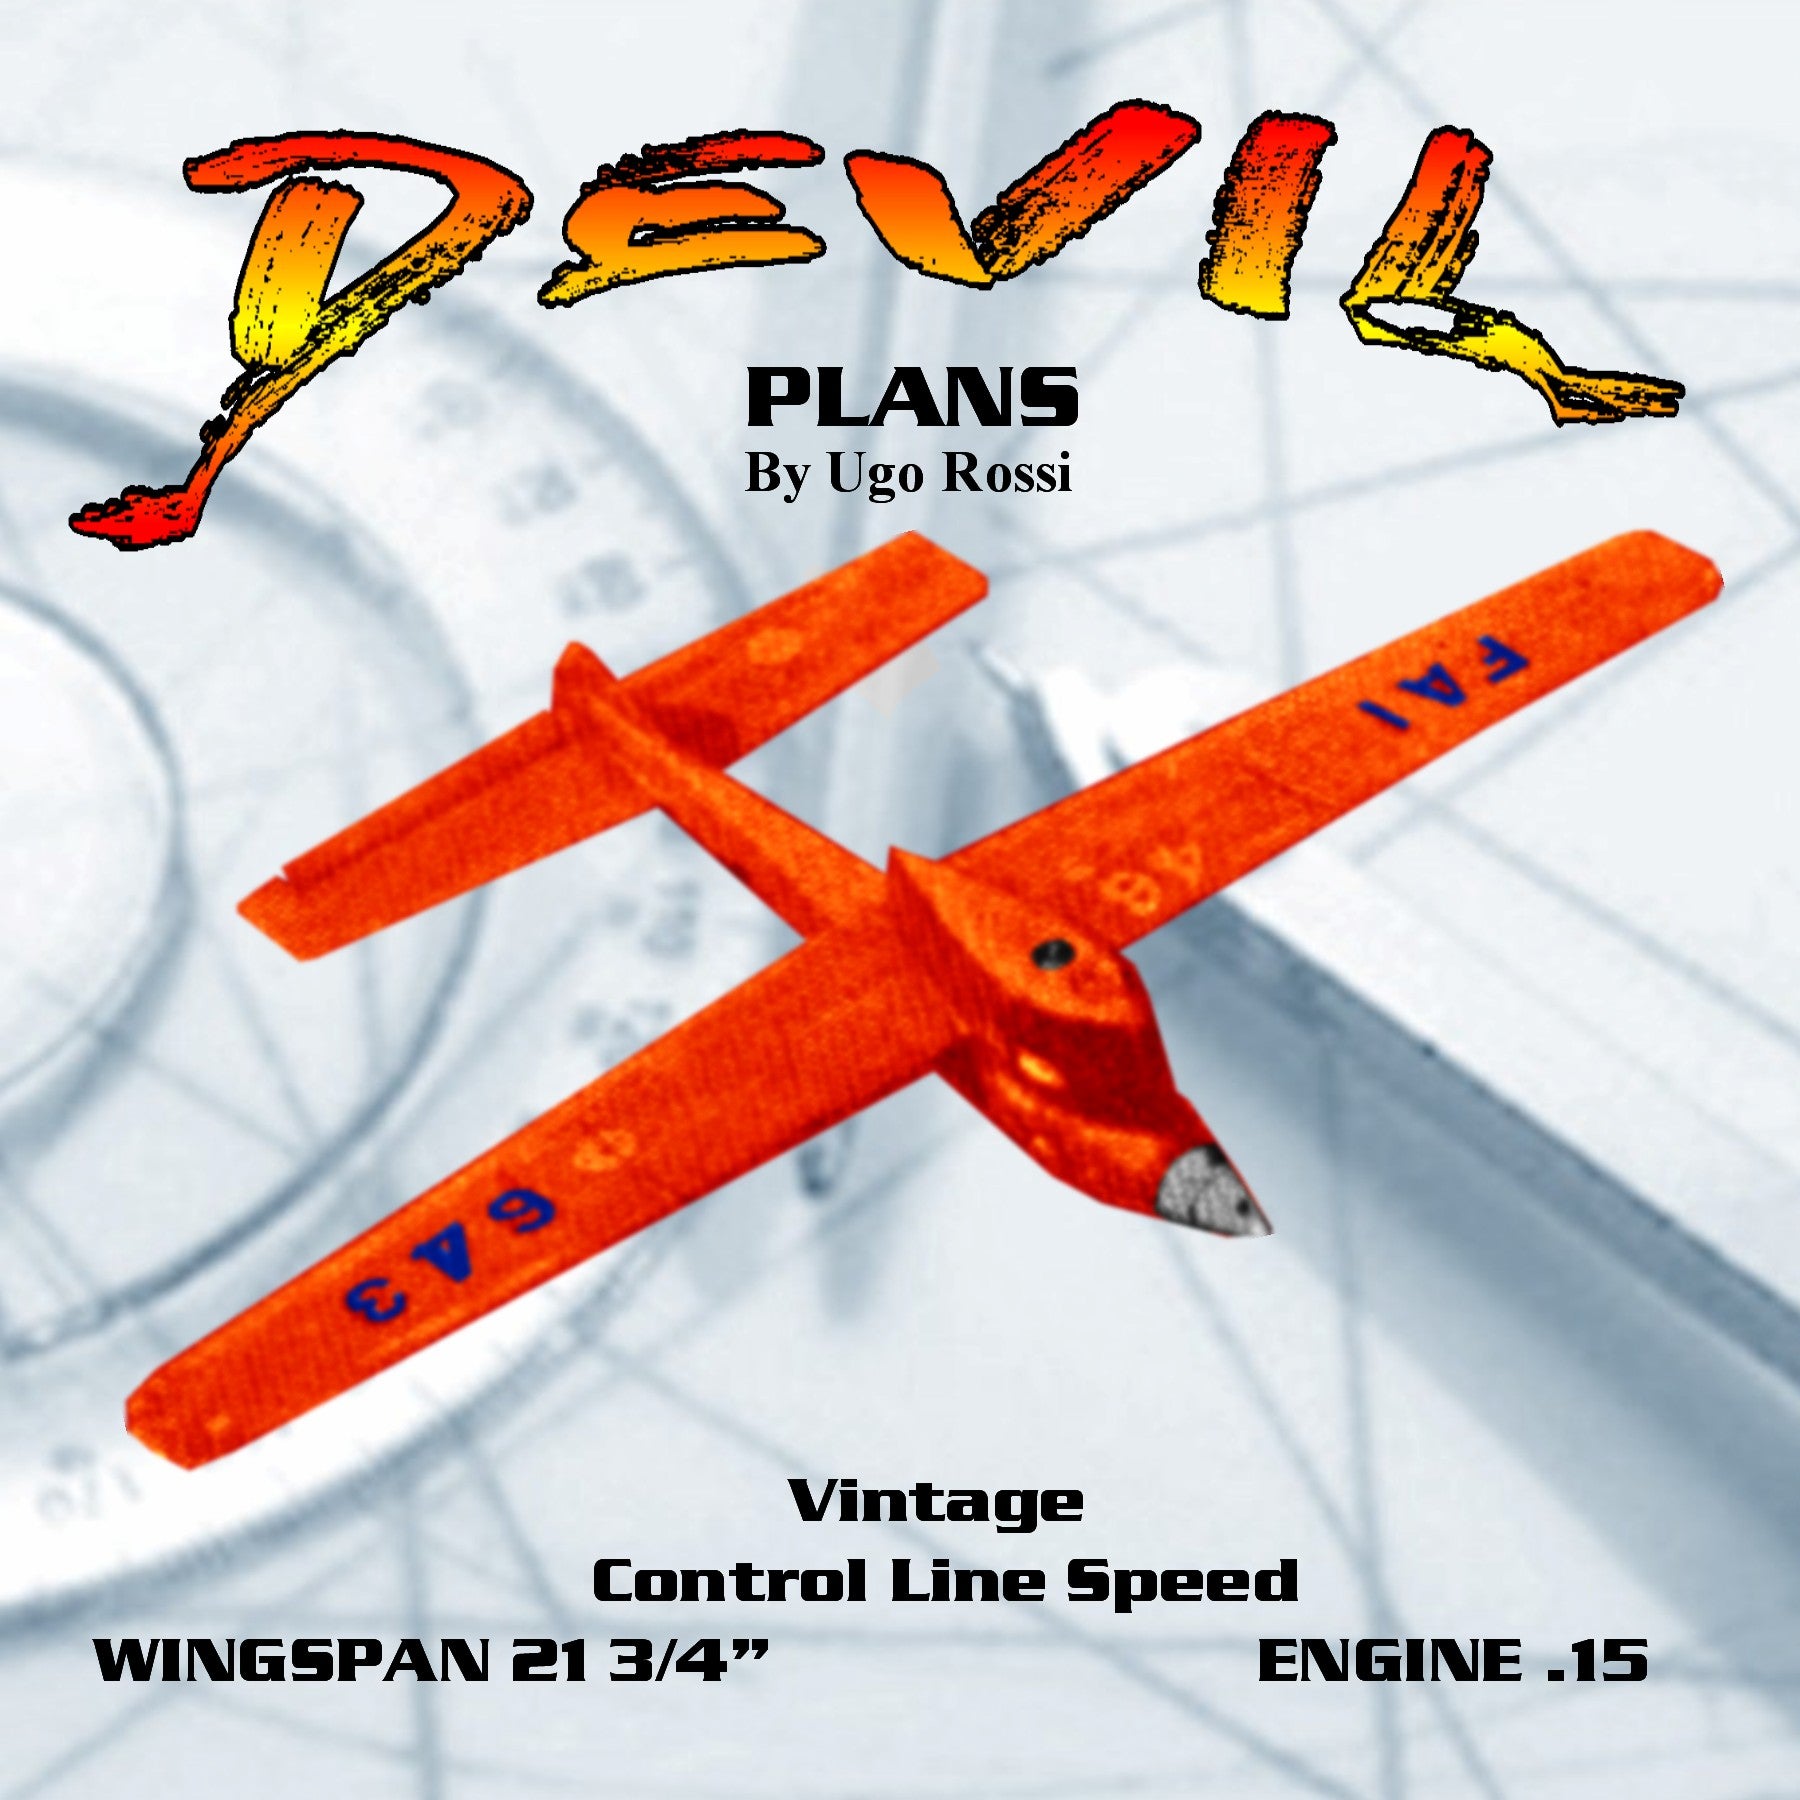 full size printed plans 1960 control line speed  devil most successful f.a.i.